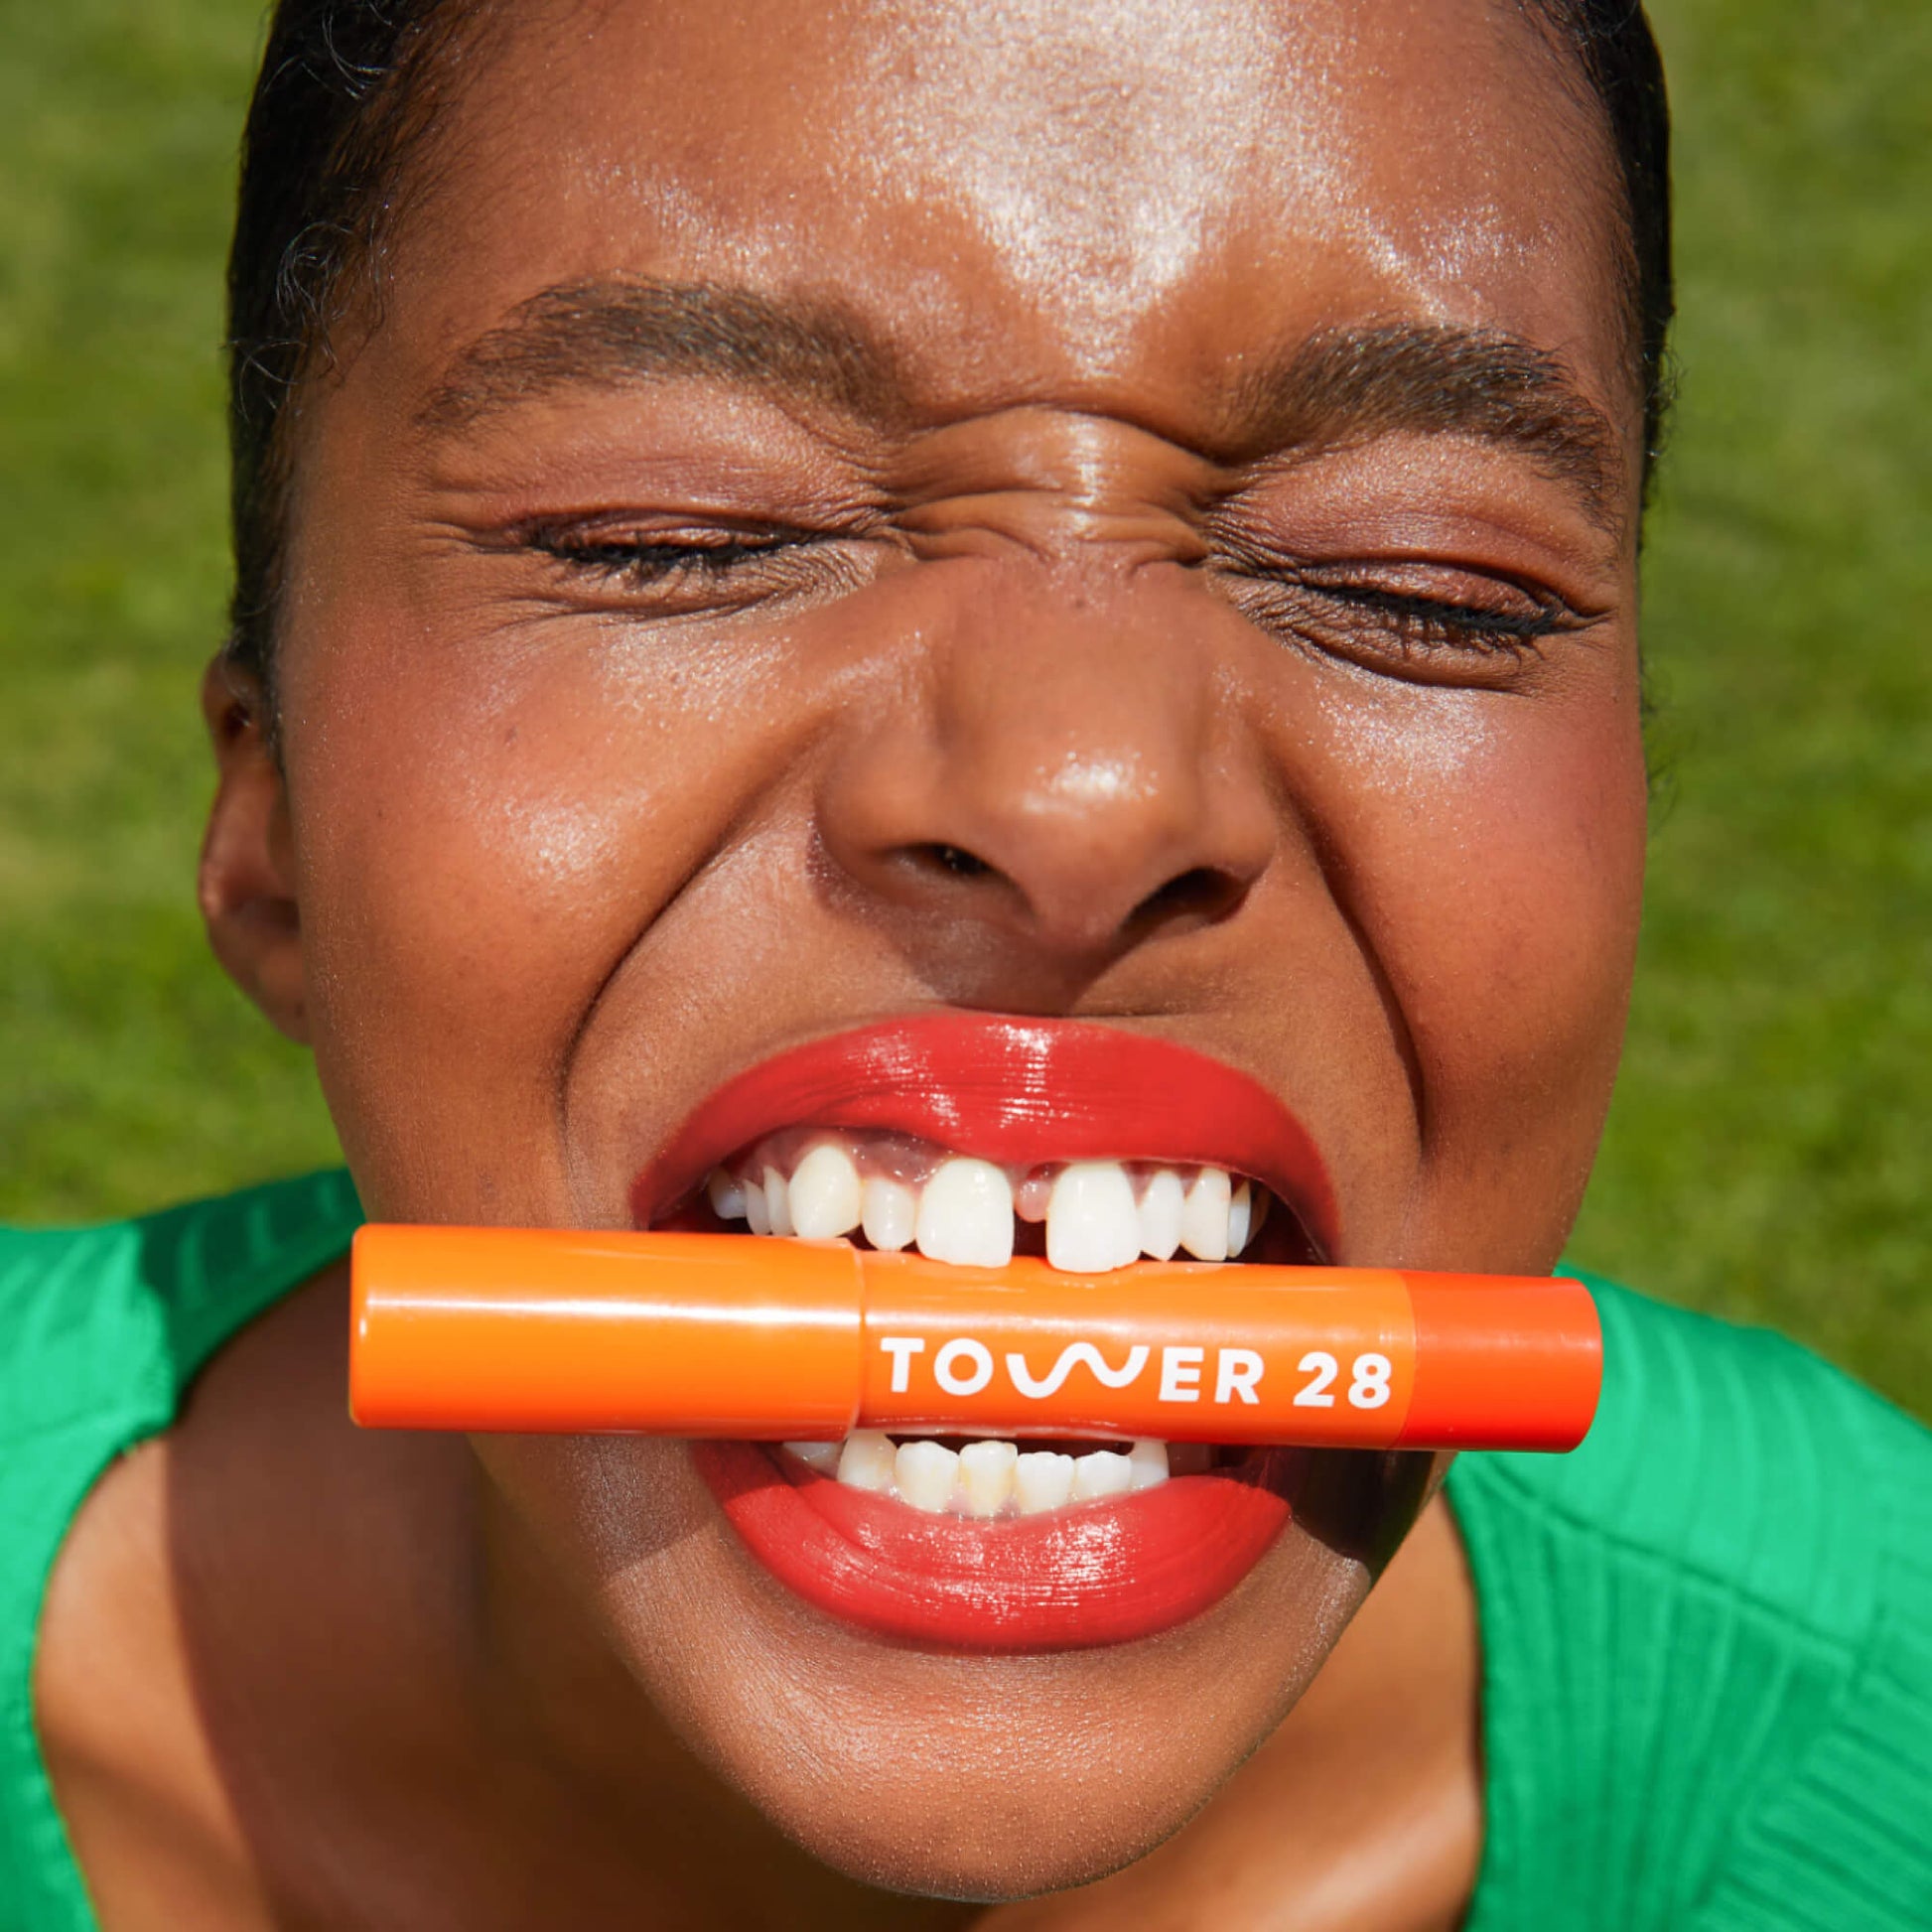 A model who has applied Tower 28 Beauty's JuiceBalm Lip Balm in shade Squeeze on her lips and is also posing with the product between her lips.